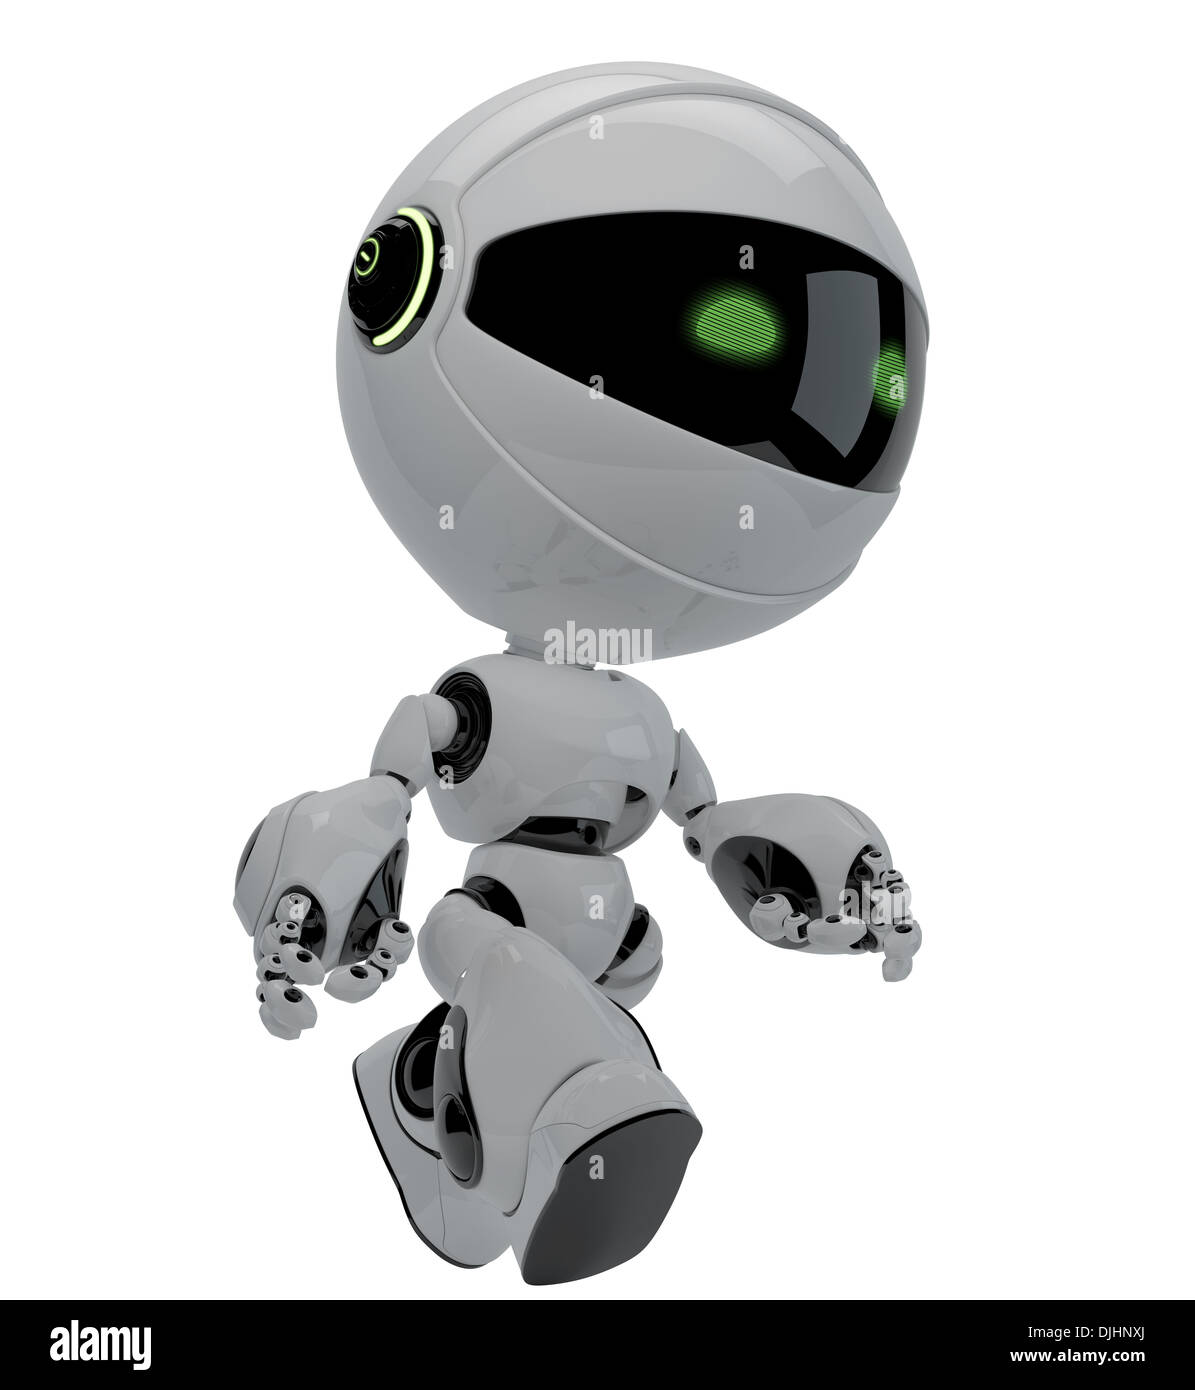 Cute robotic creature, circle robot with green led eyes Stock Photo - Alamy